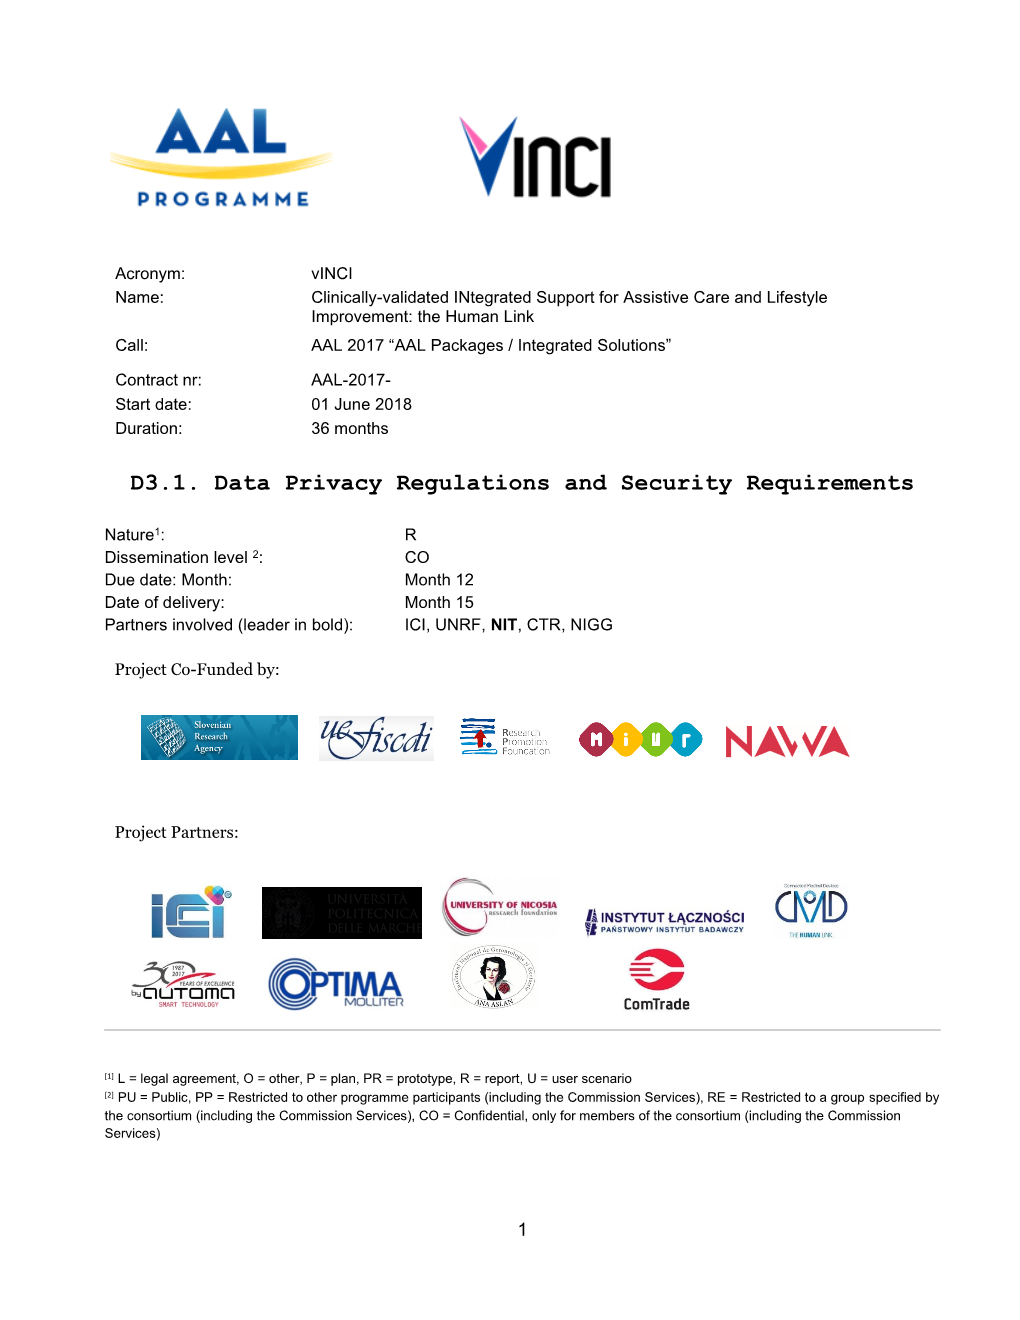 D3.1. Data Privacy Regulations and Security Requirements